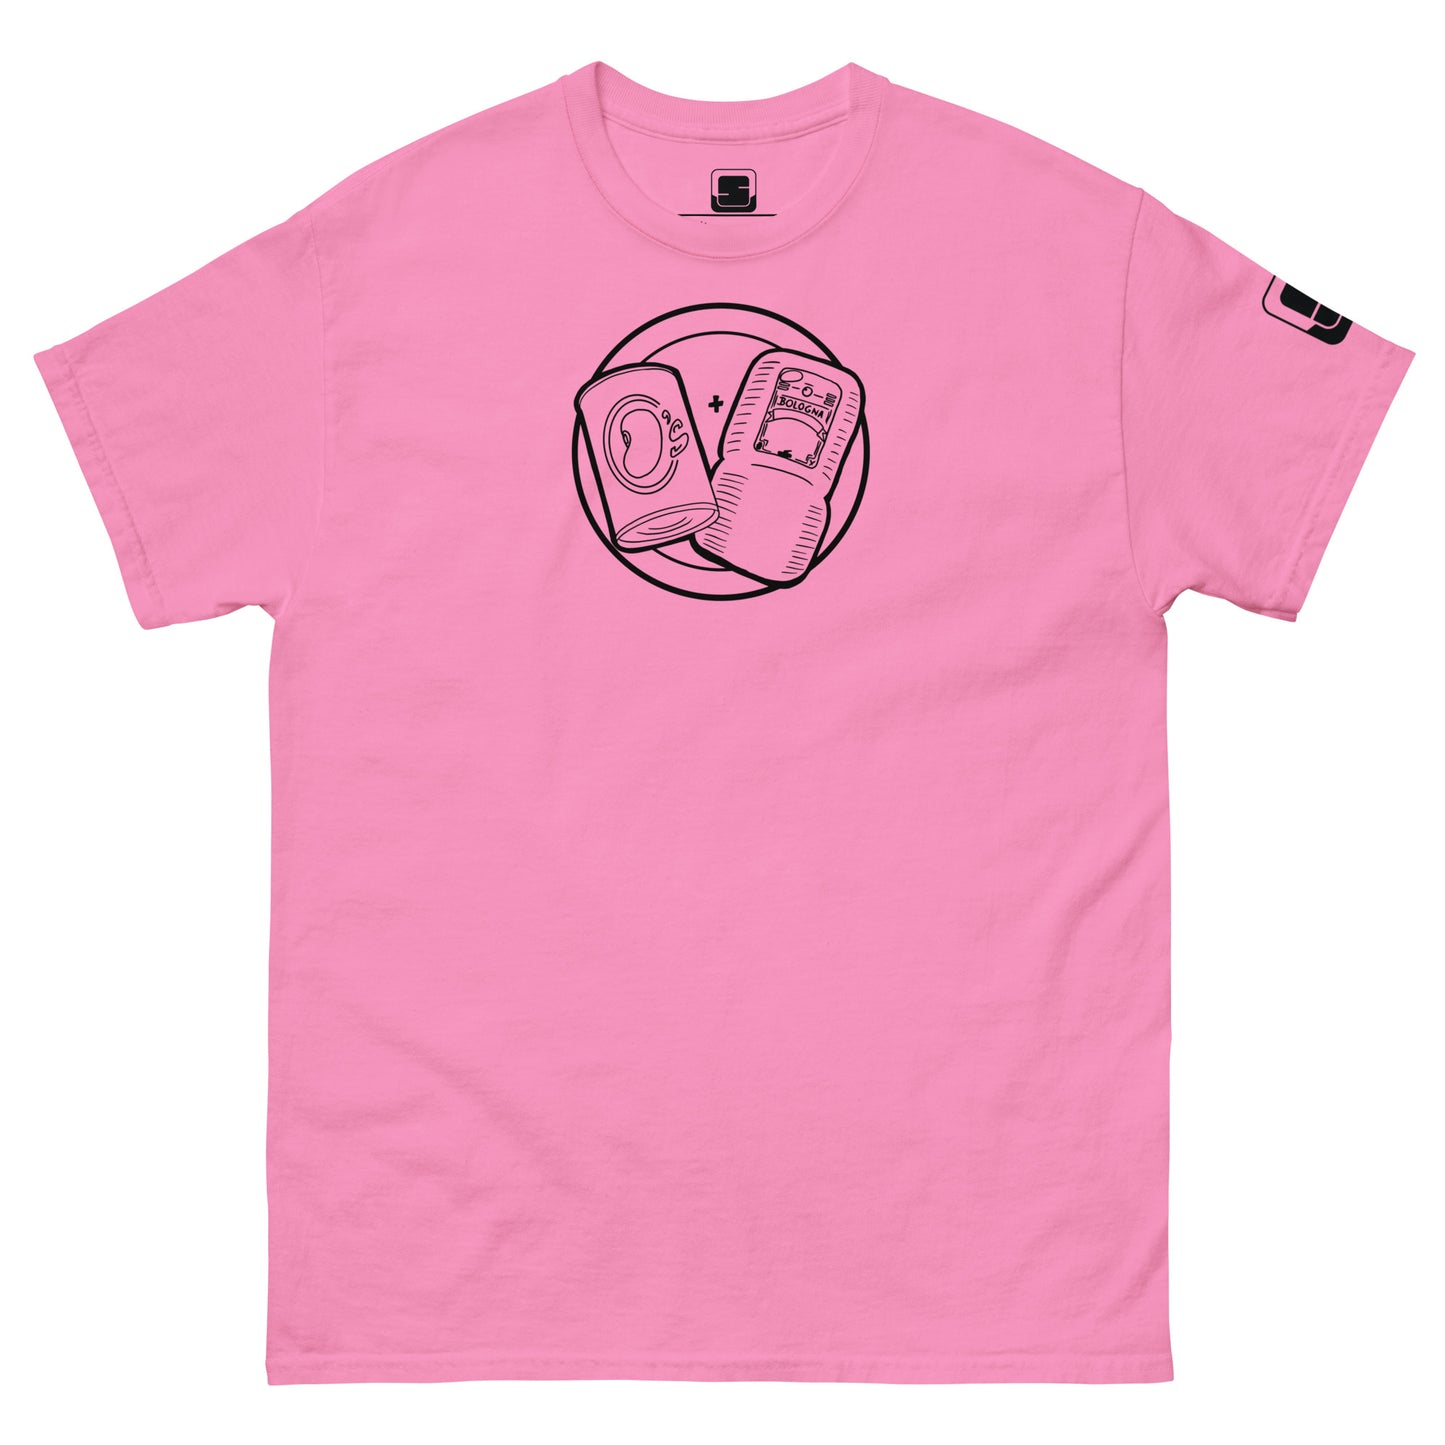  A bright pink t-shirt is displayed flat, featuring a circular emblem in black line art on the chest. The emblem depicts a can of beans and a packet of bologna with a "+" sign between them. The right sleeve has a small black logo patch. The playful graphic stands out against the vibrant pink background, creating a stylish and fun vibe while emphasizing the t-shirt's relaxed and casual design.